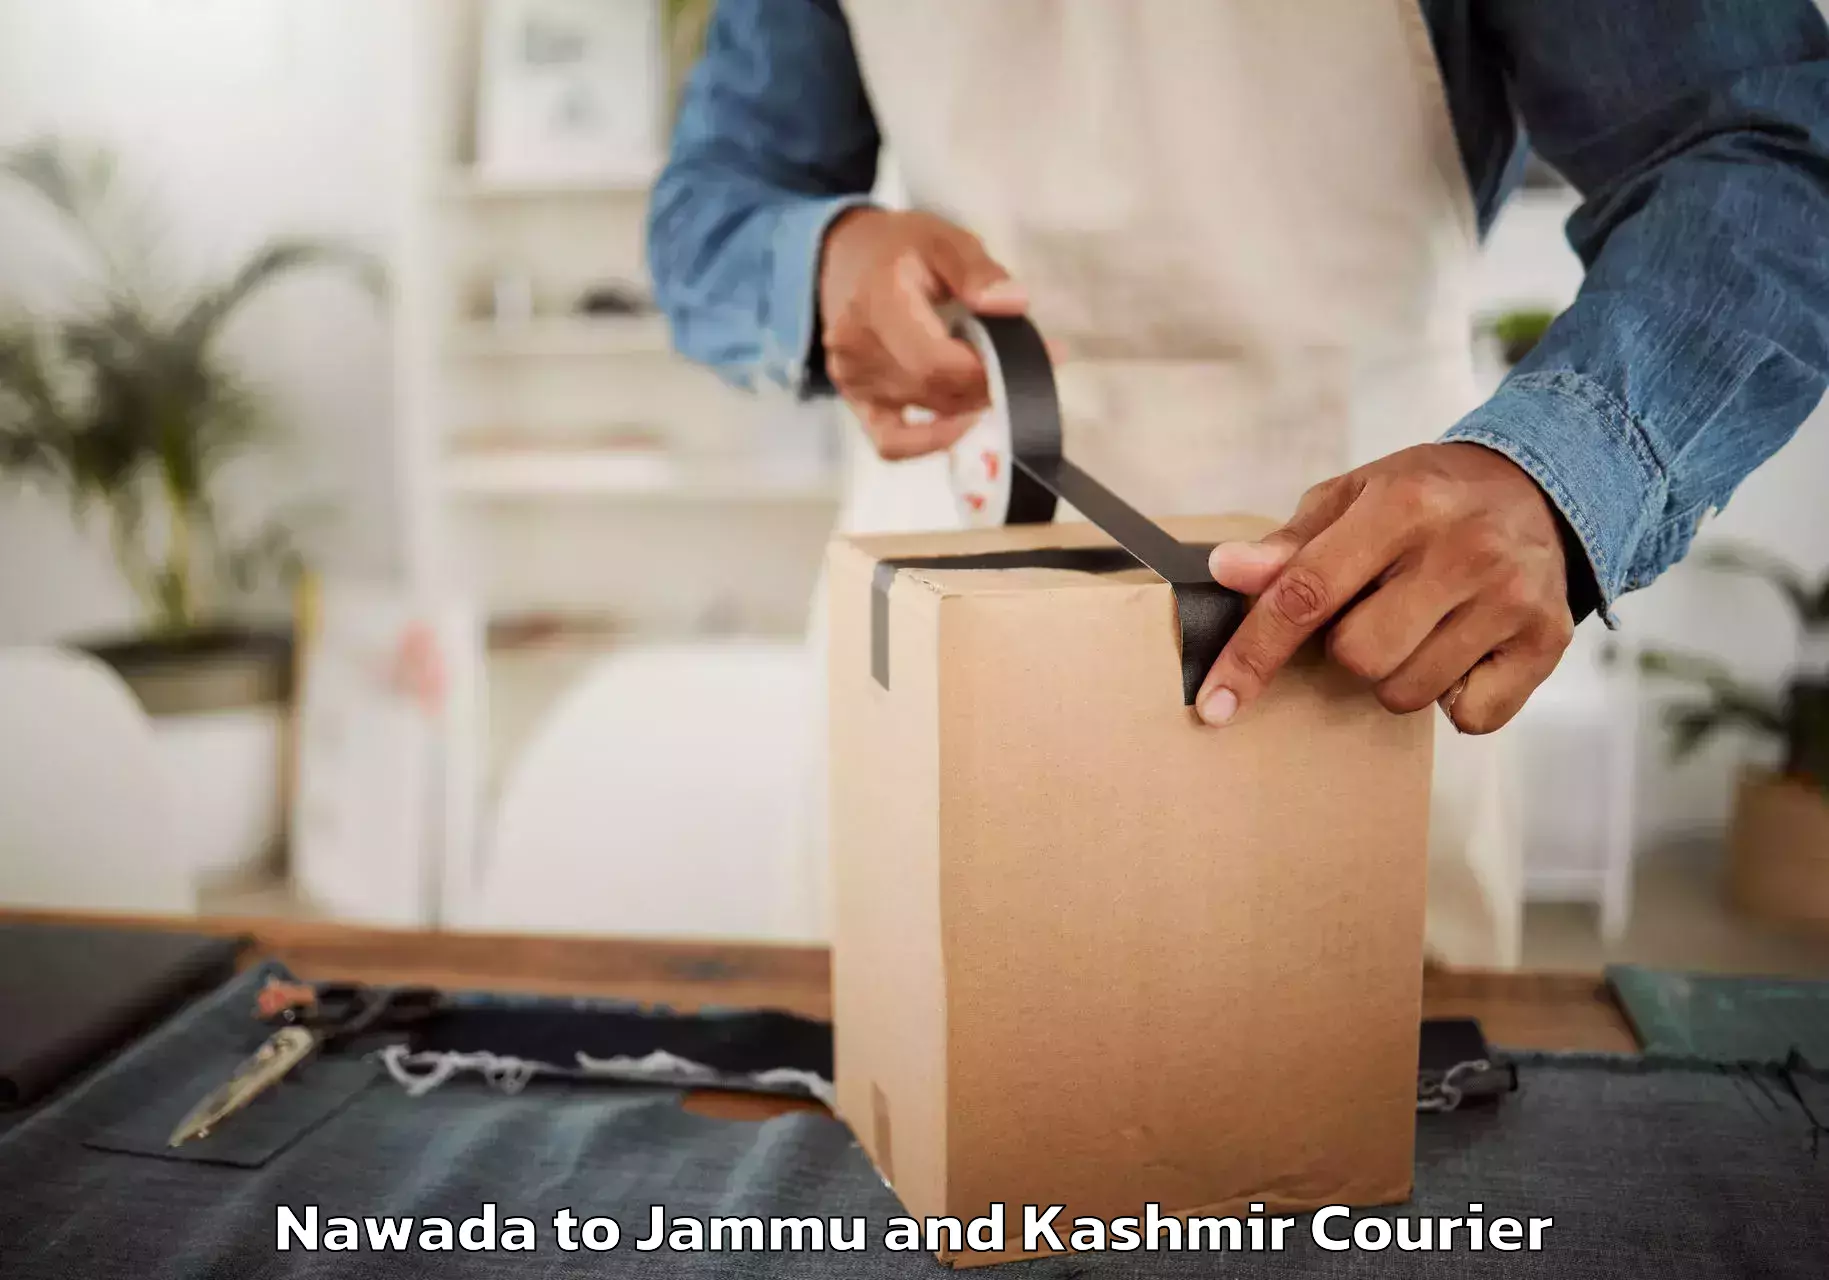 Professional movers and packers Nawada to Srinagar Kashmir